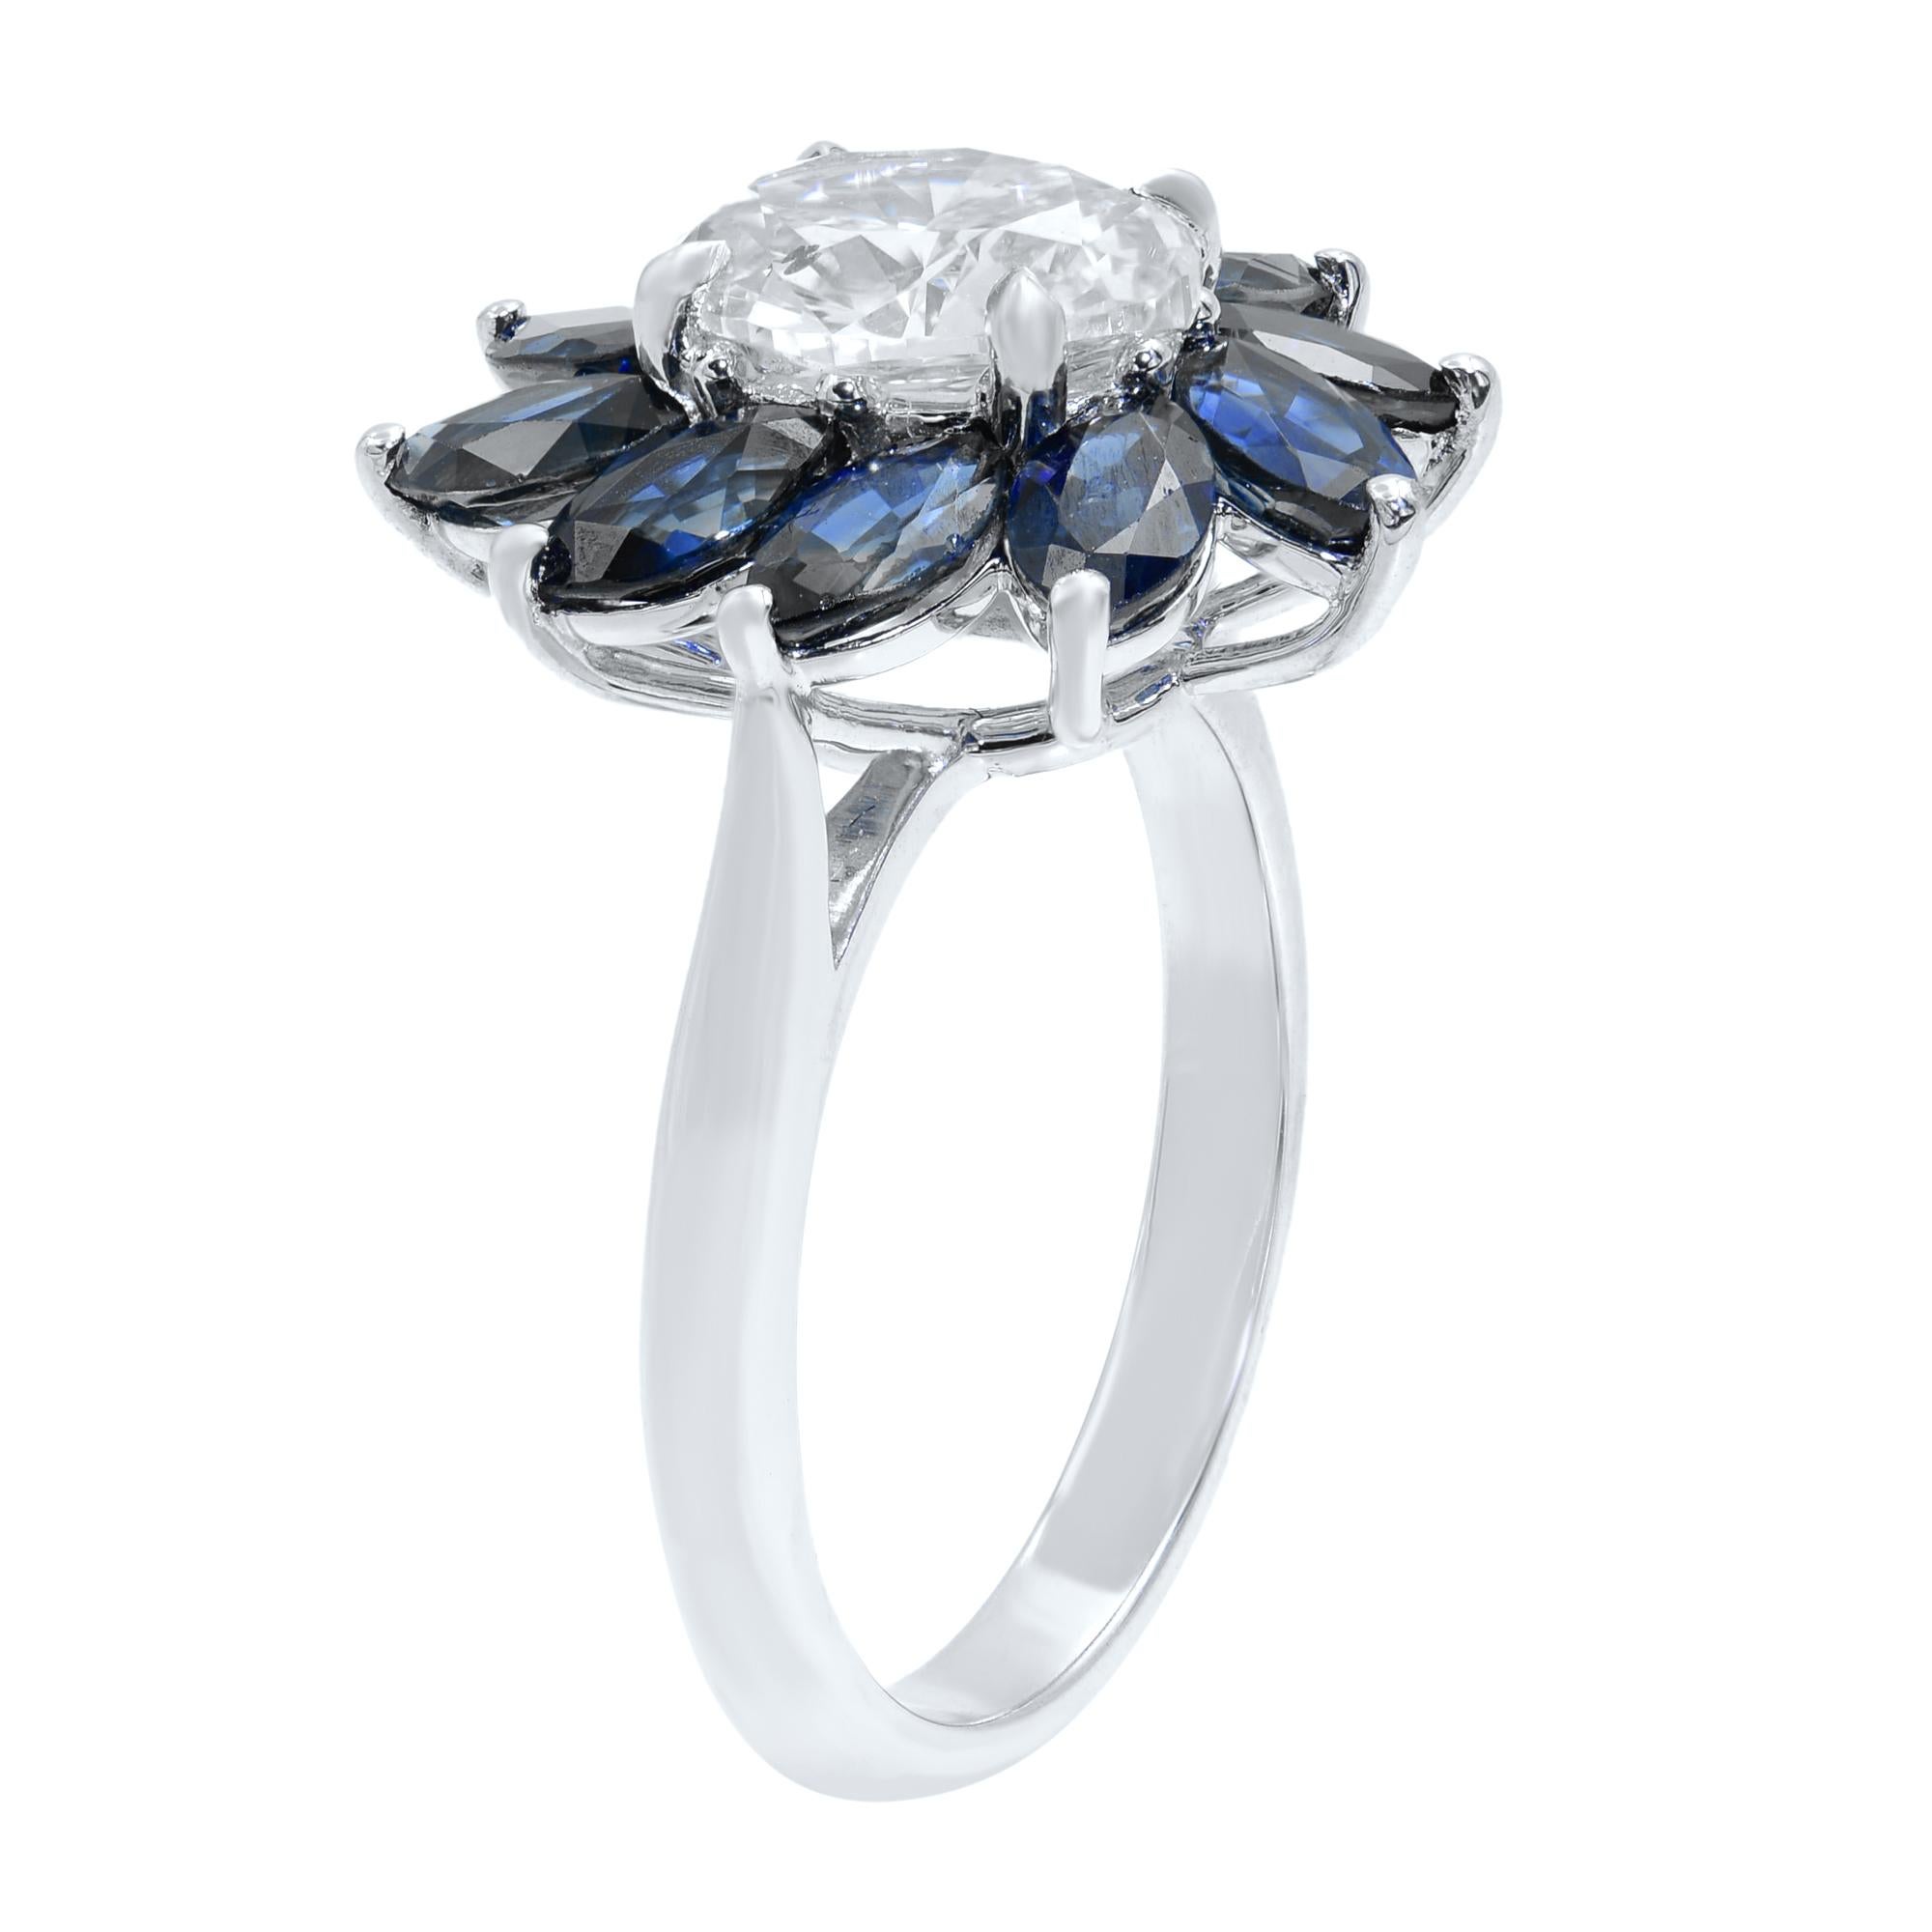 A bright white and shining oval-cut diamond, total weight, 1.51 carat, centers sparkling marquise-cut blue sapphire petals in this classic vintage-style flower ring recently crafted in our very own jewelry shop. One of a kind oval cut diamond